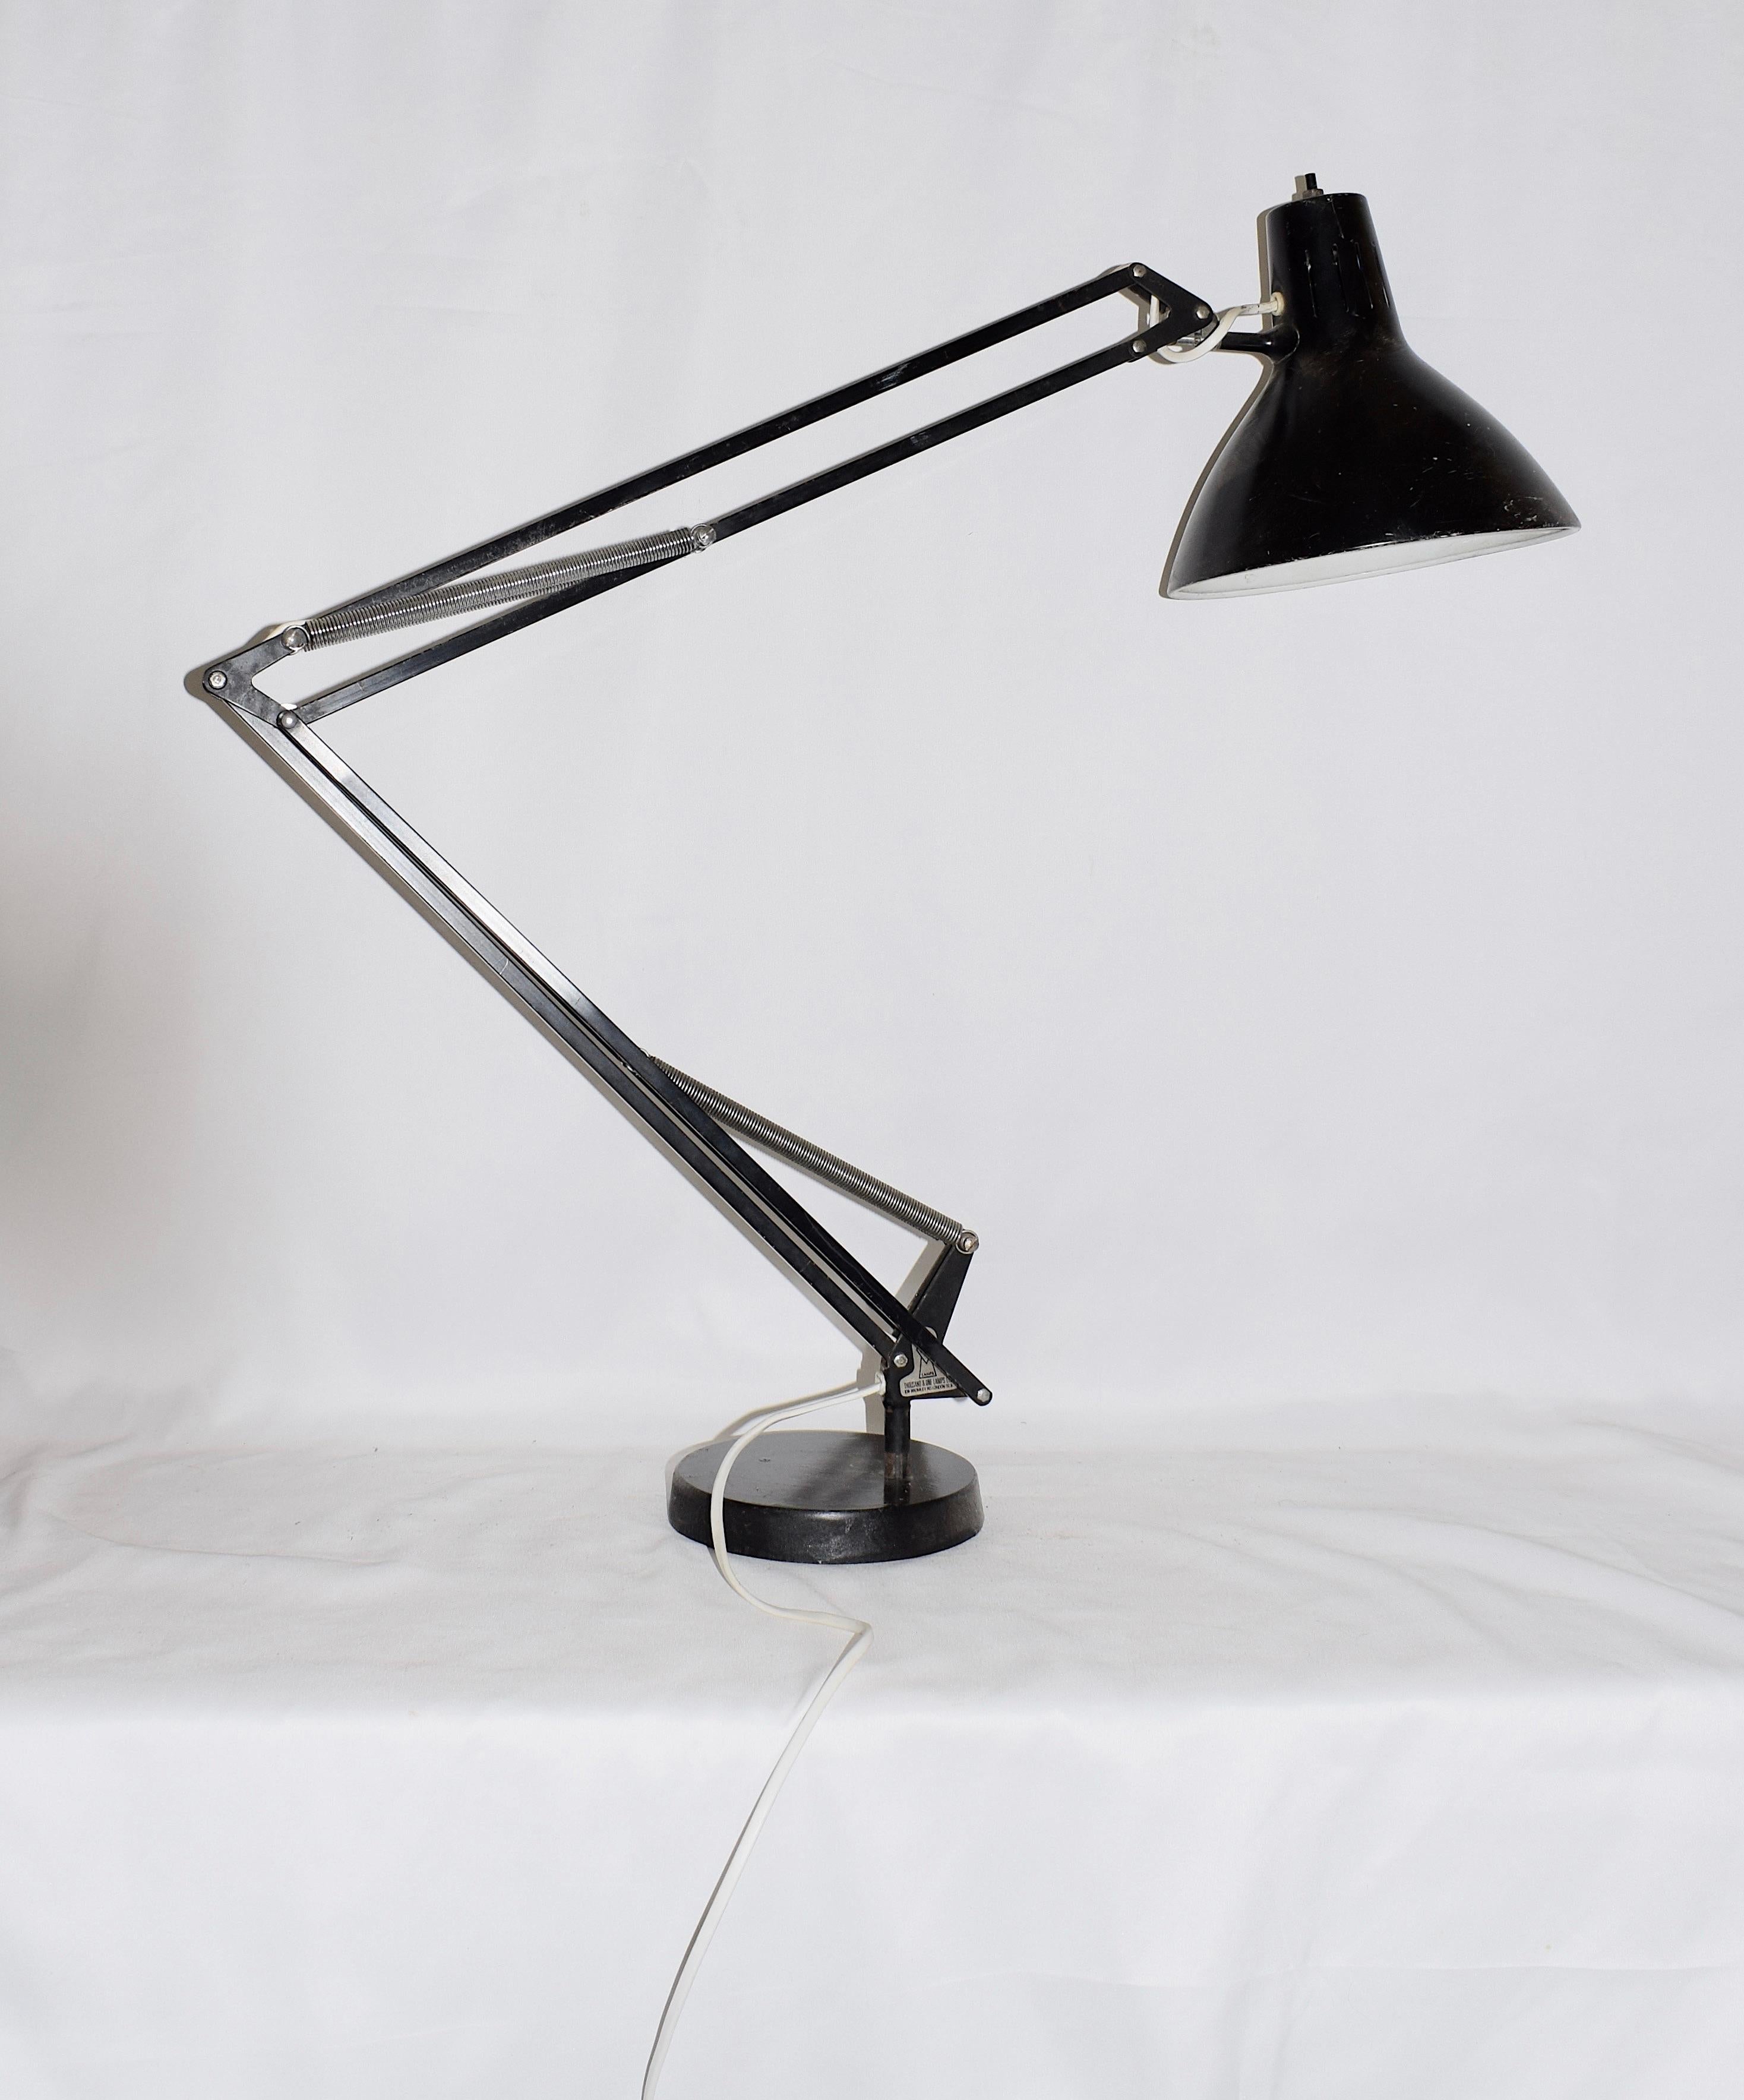 This desk lamp was designed by Herbert Terry during the 1960s. Made by 1001 Lamps Ltd of Bromley Road London, this classic lamp is really well made and heavy. It has its attribution mark of the 1001 Lamp (makers mark) on the inside of the lamp.